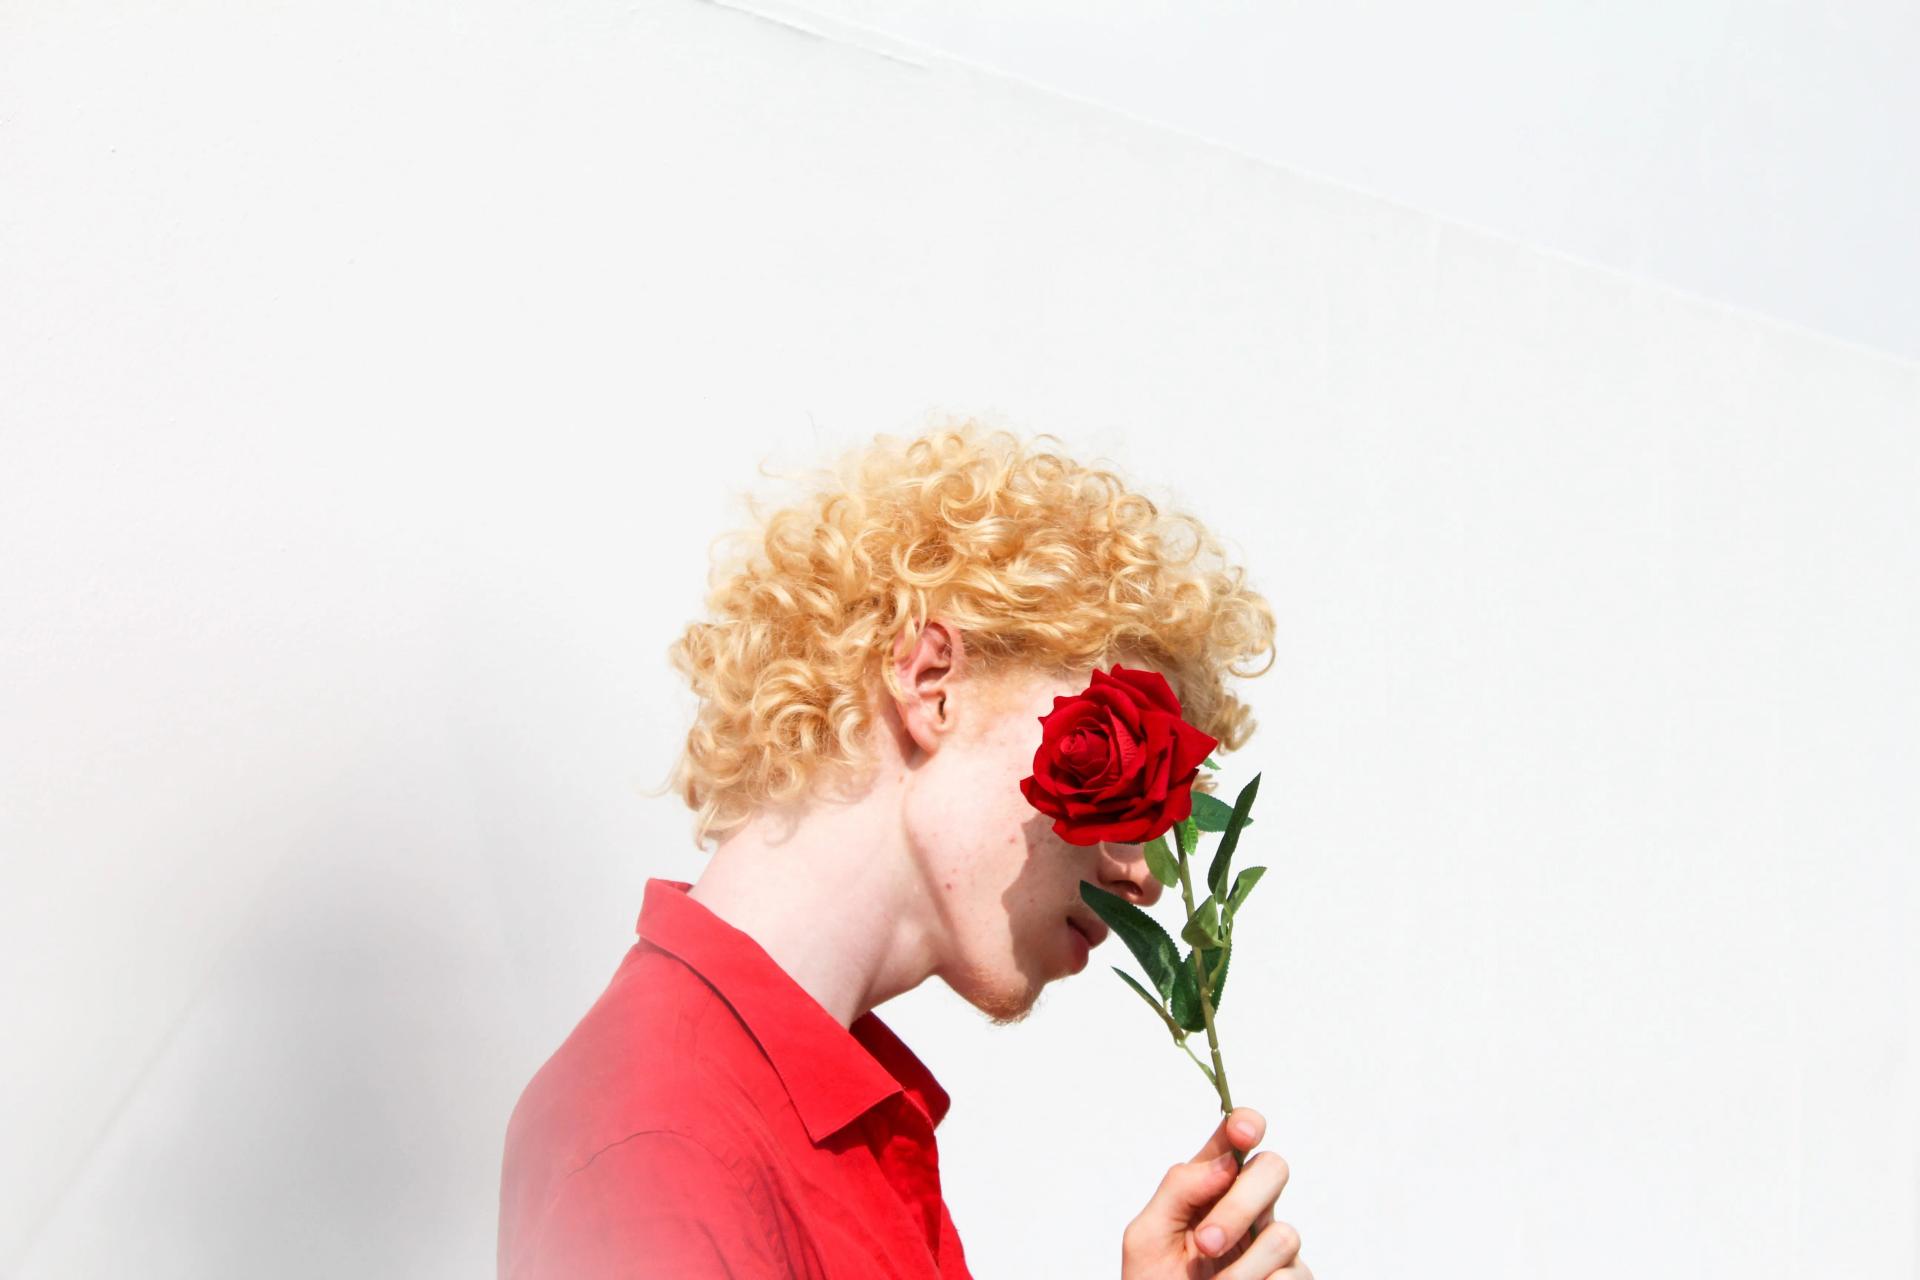 A Boy with a Rose